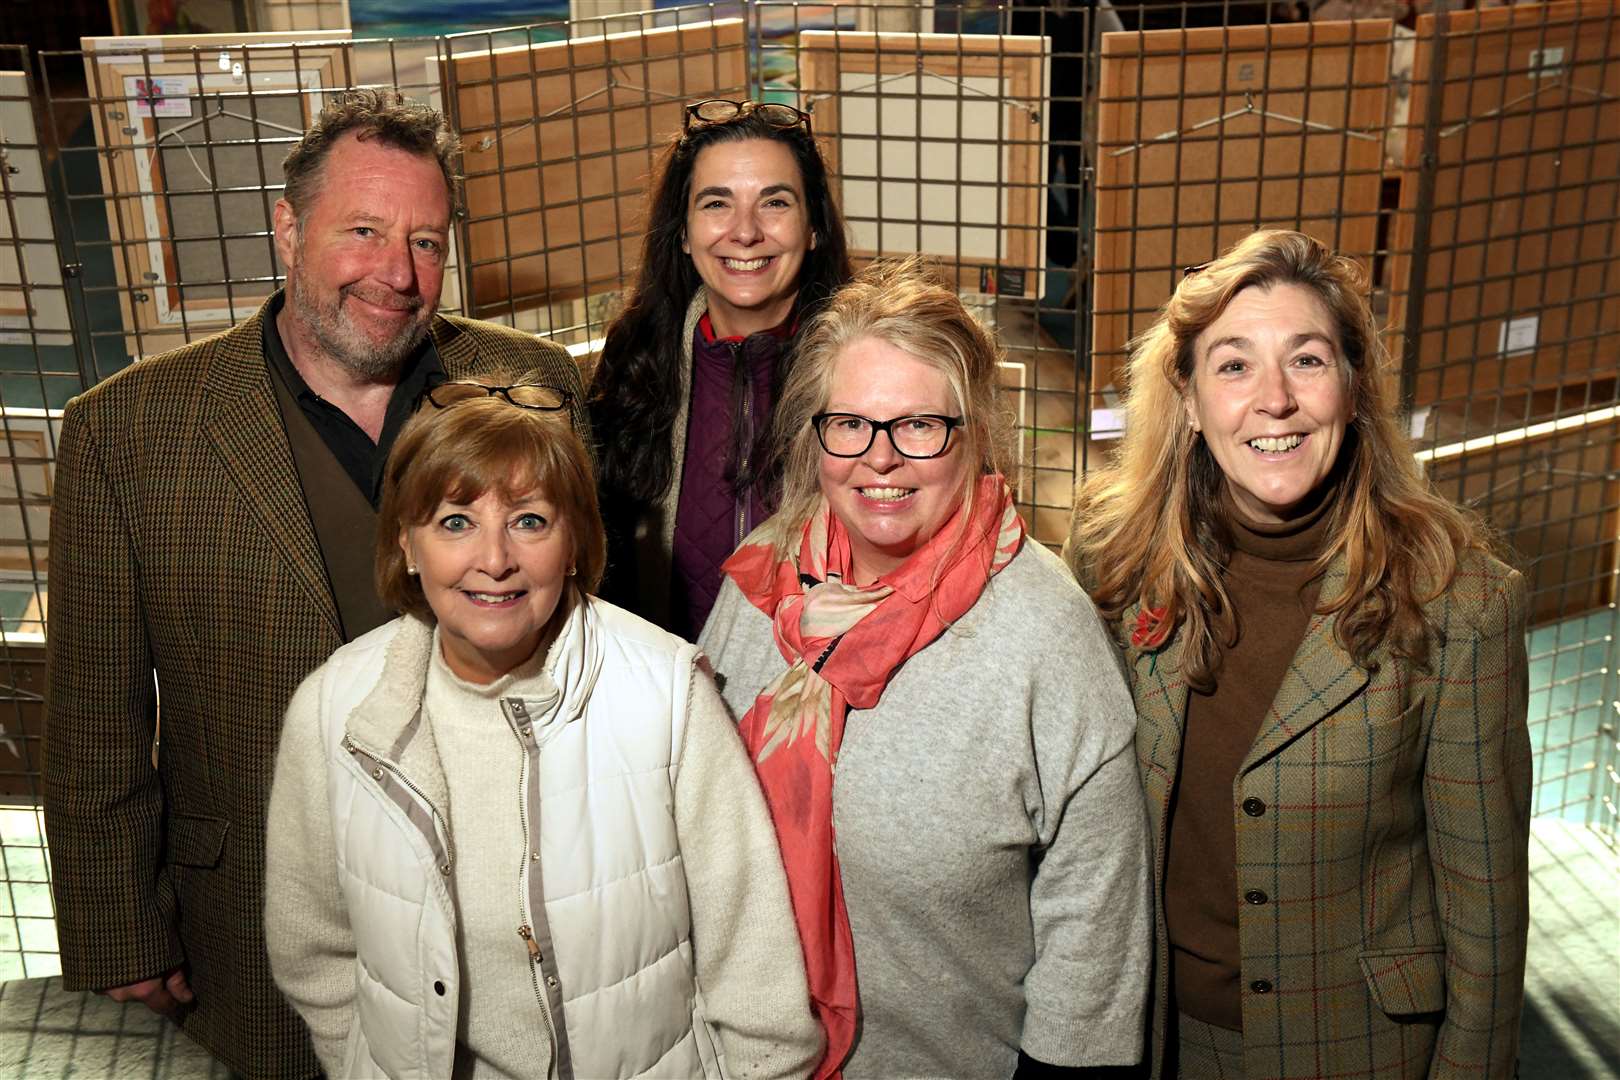 Colin Dodds, estate manager, Avril Macphee, artist, Gils Paget, supporter, Sally Howells, artist, and Hilary Andexer, organiser. Picture: James Mackenzie